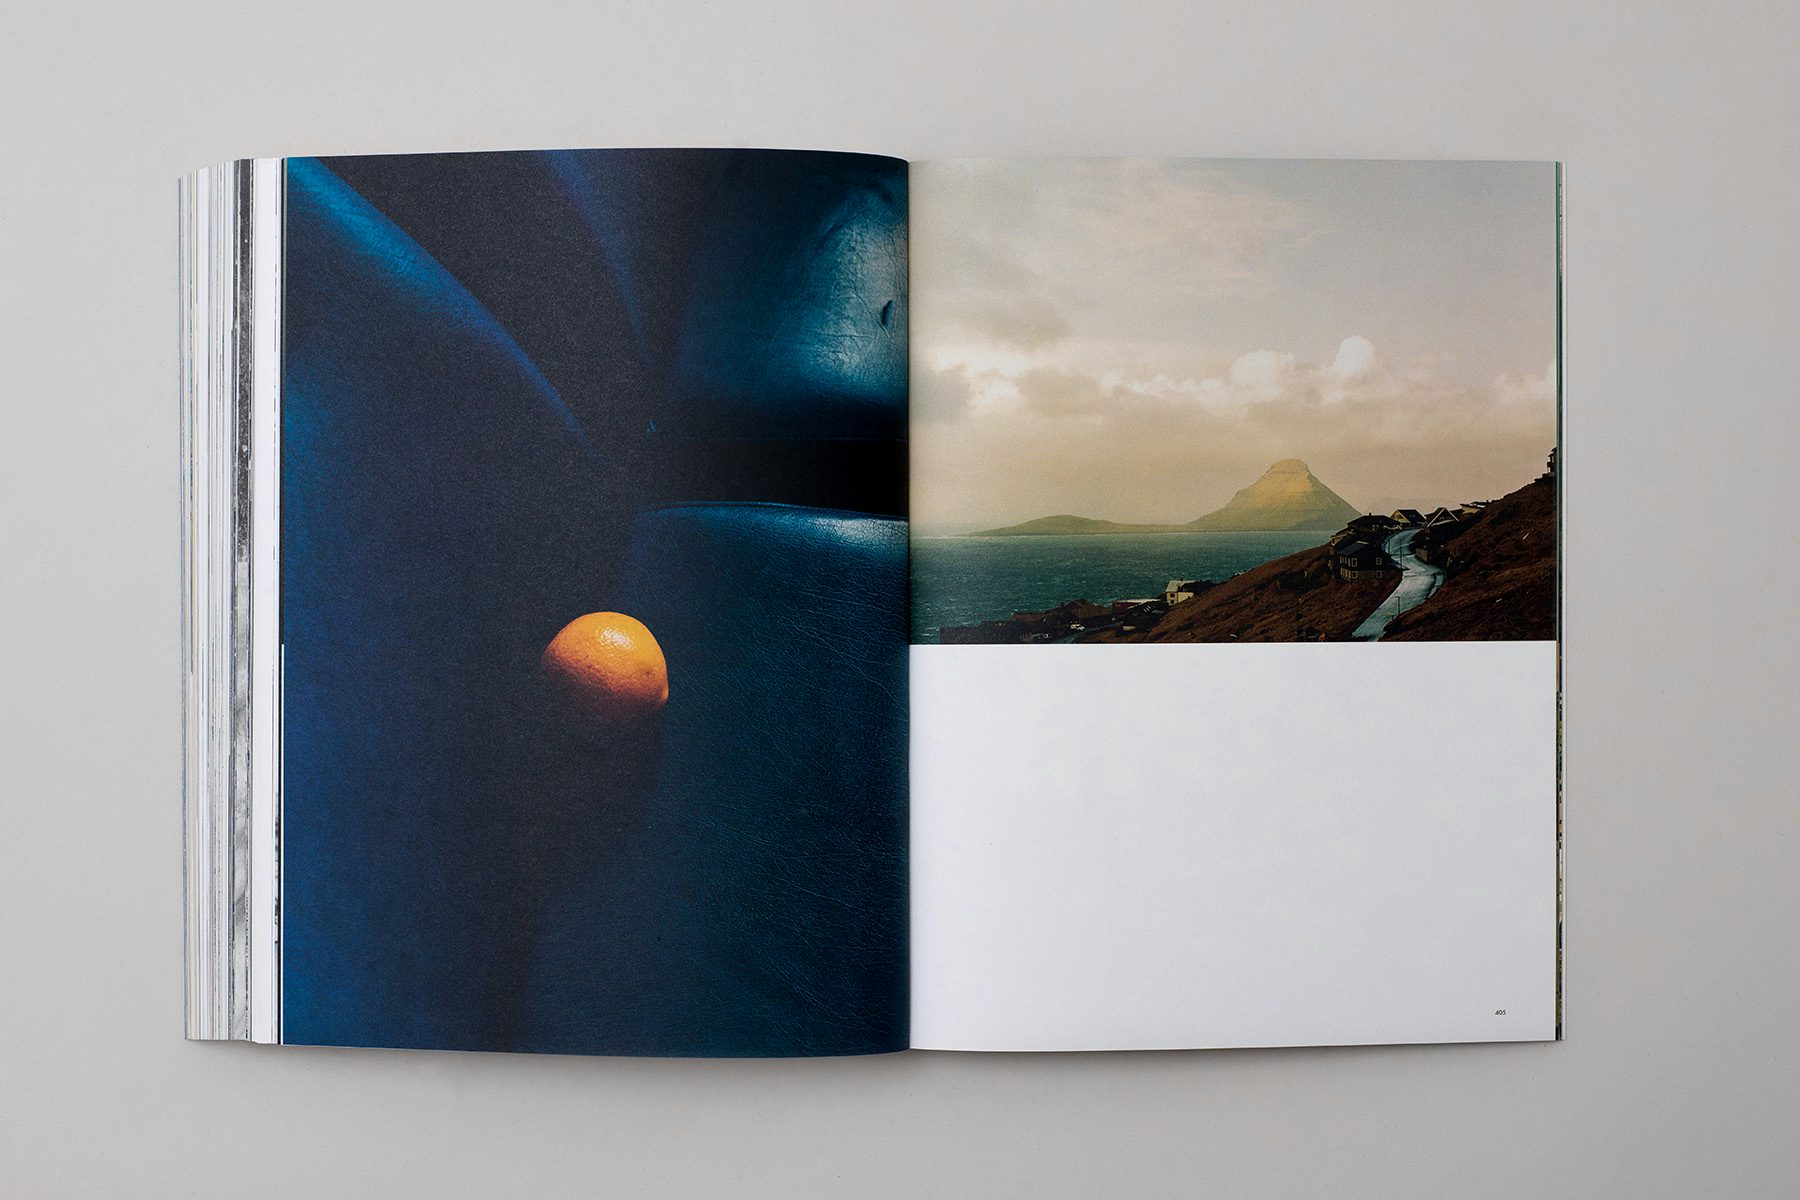 Photograph of a spread from the Blue issue of The Colour Journal, showing a photo of an orange on a dark blue leathery surface on the left hand page, and a landscape half-page photograph of a hillside road and a mountain in the background